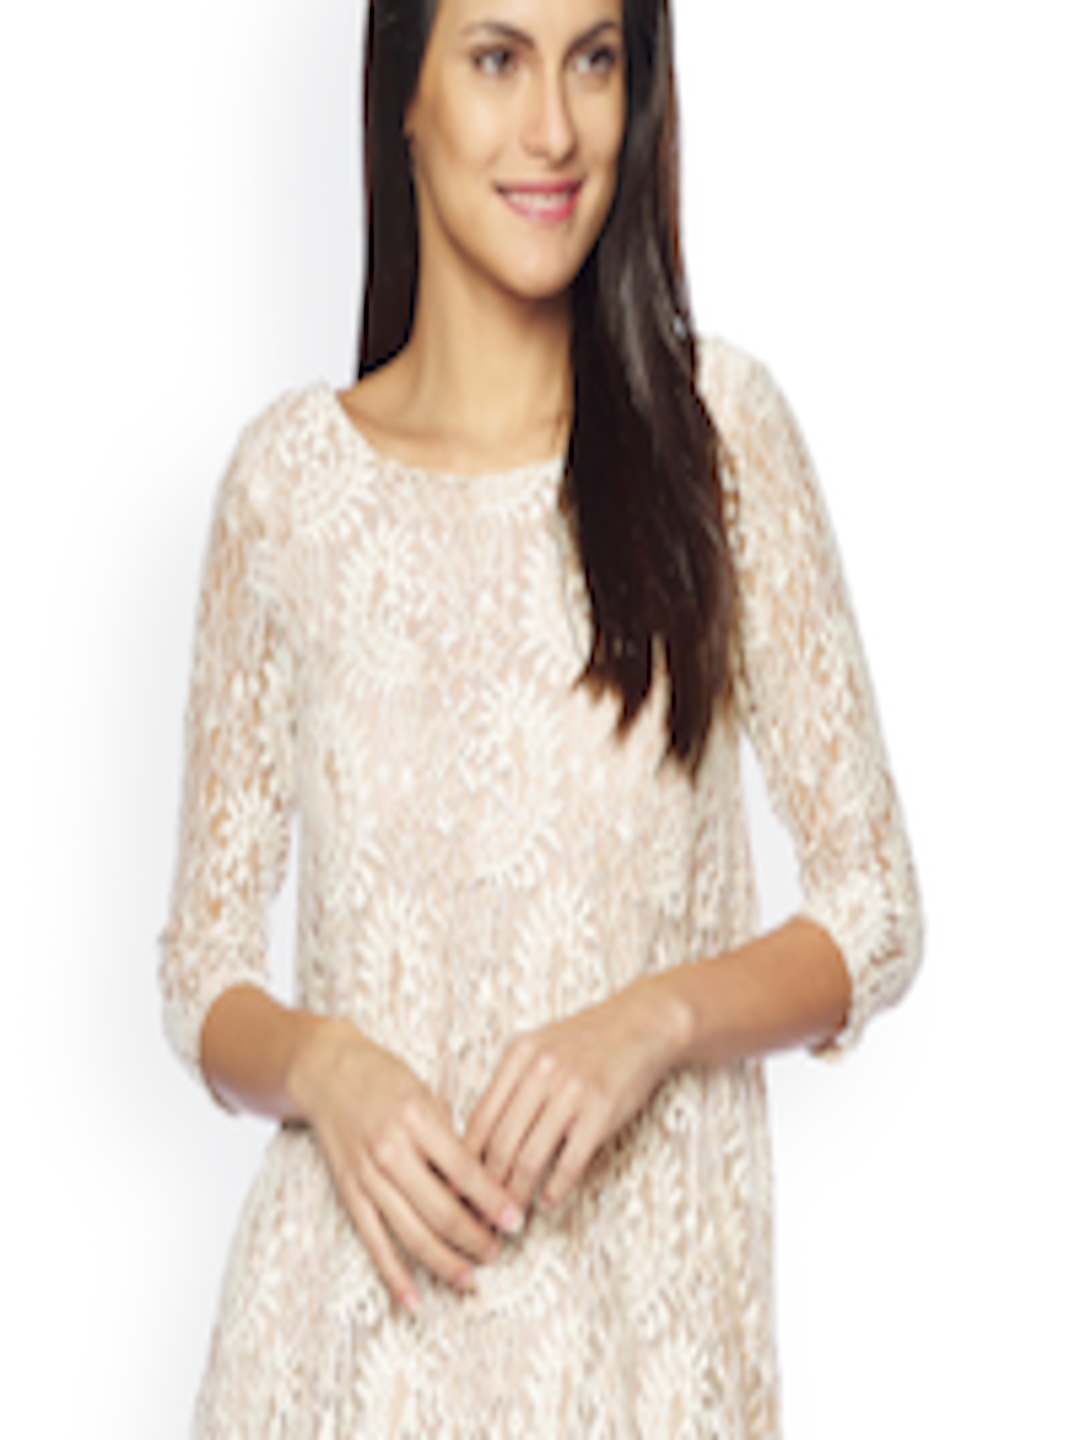 Buy AND Off White Lace Top - Tops for Women 1135647 | Myntra